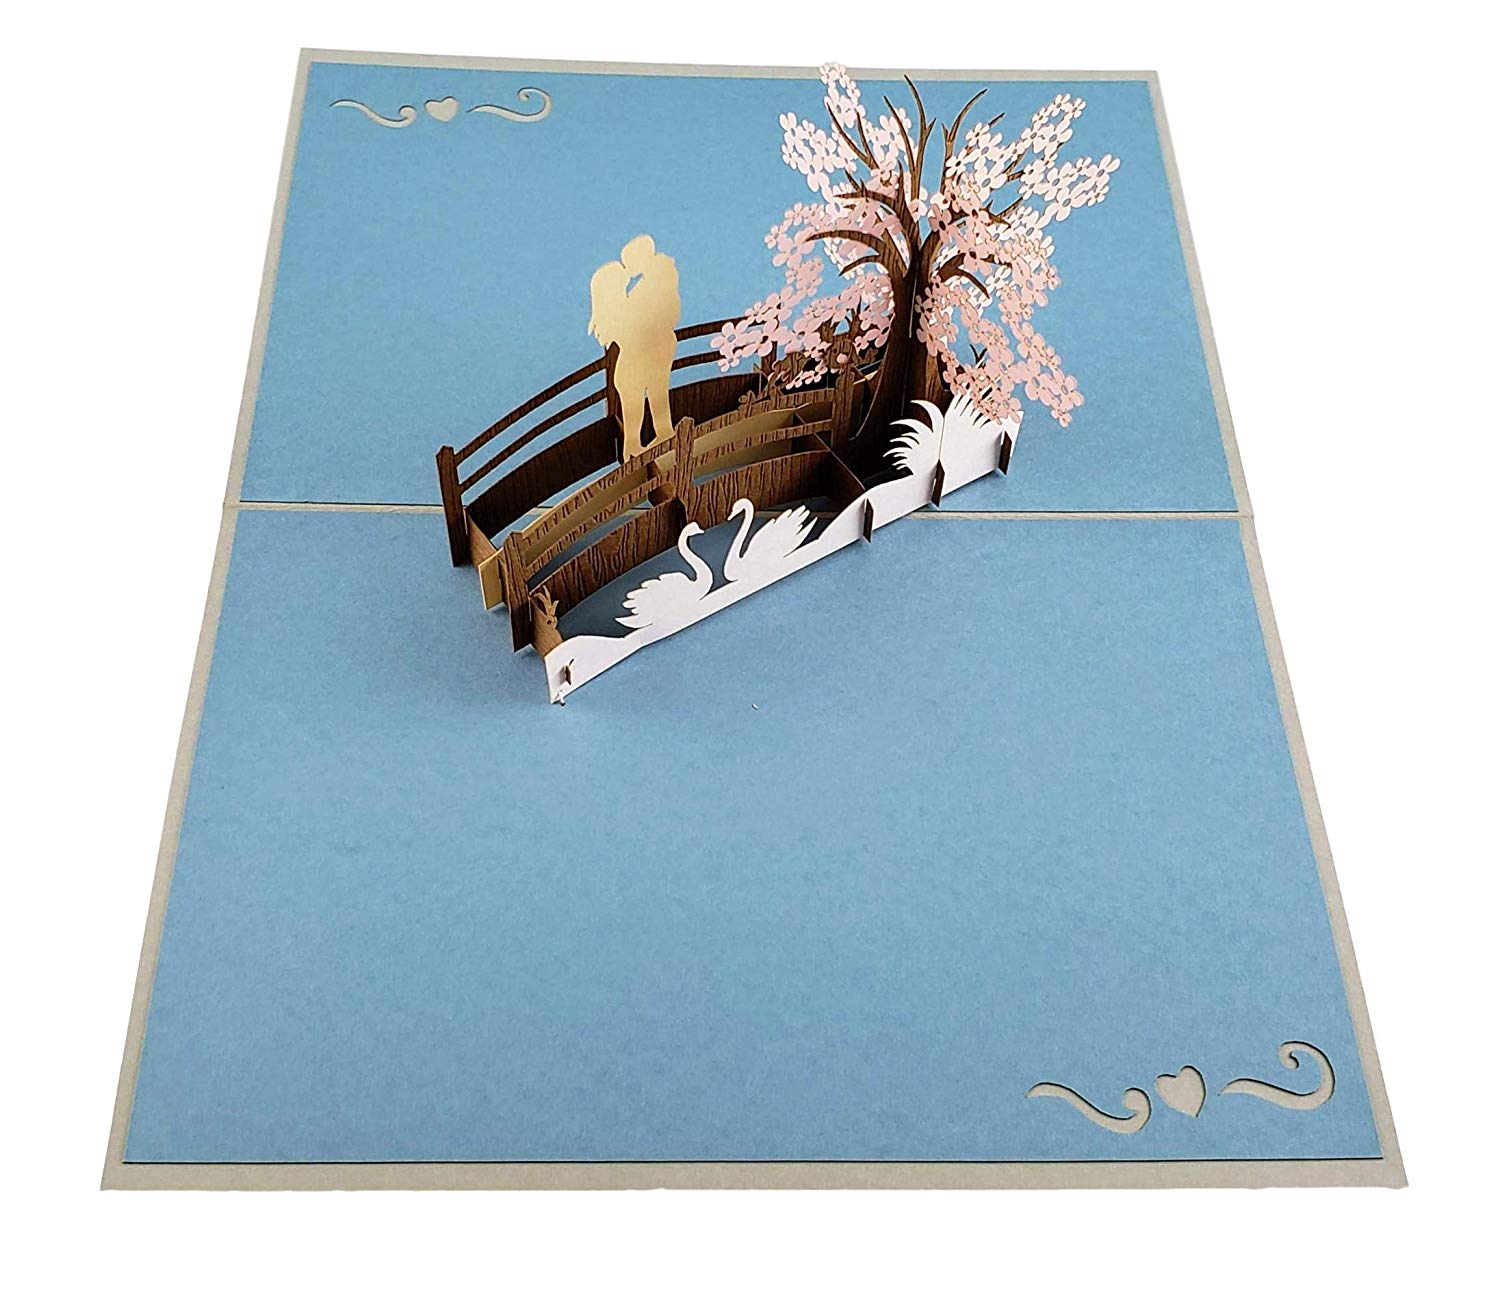 Happy 10th Anniversary 3D Pop Up Greeting Card - 10th Wedding Anniversary - Anniversary - Love - Wed - iGifts And Cards